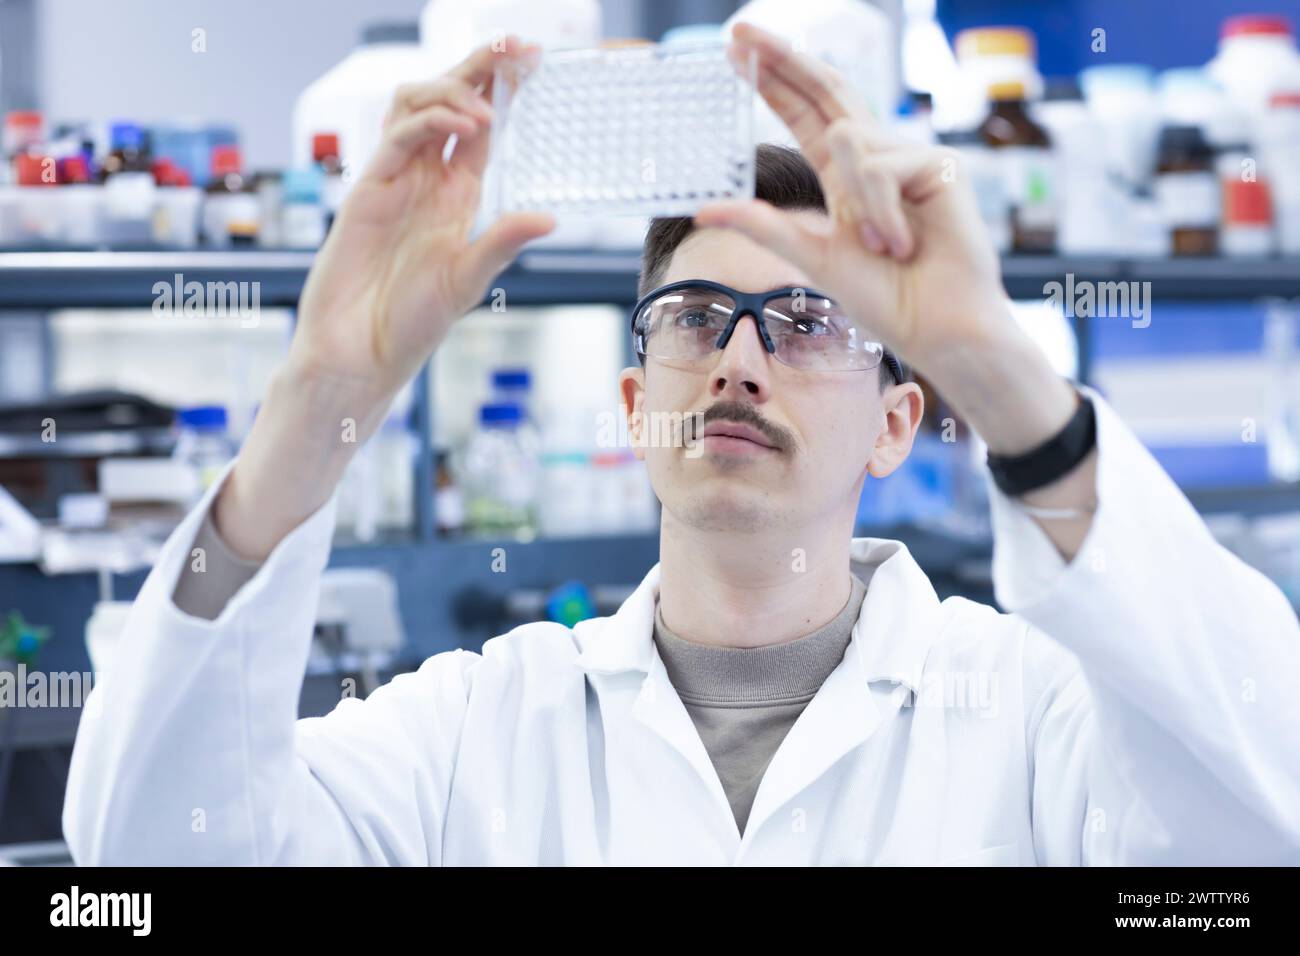 Scientist examining samples in a laboratory Stock Photo